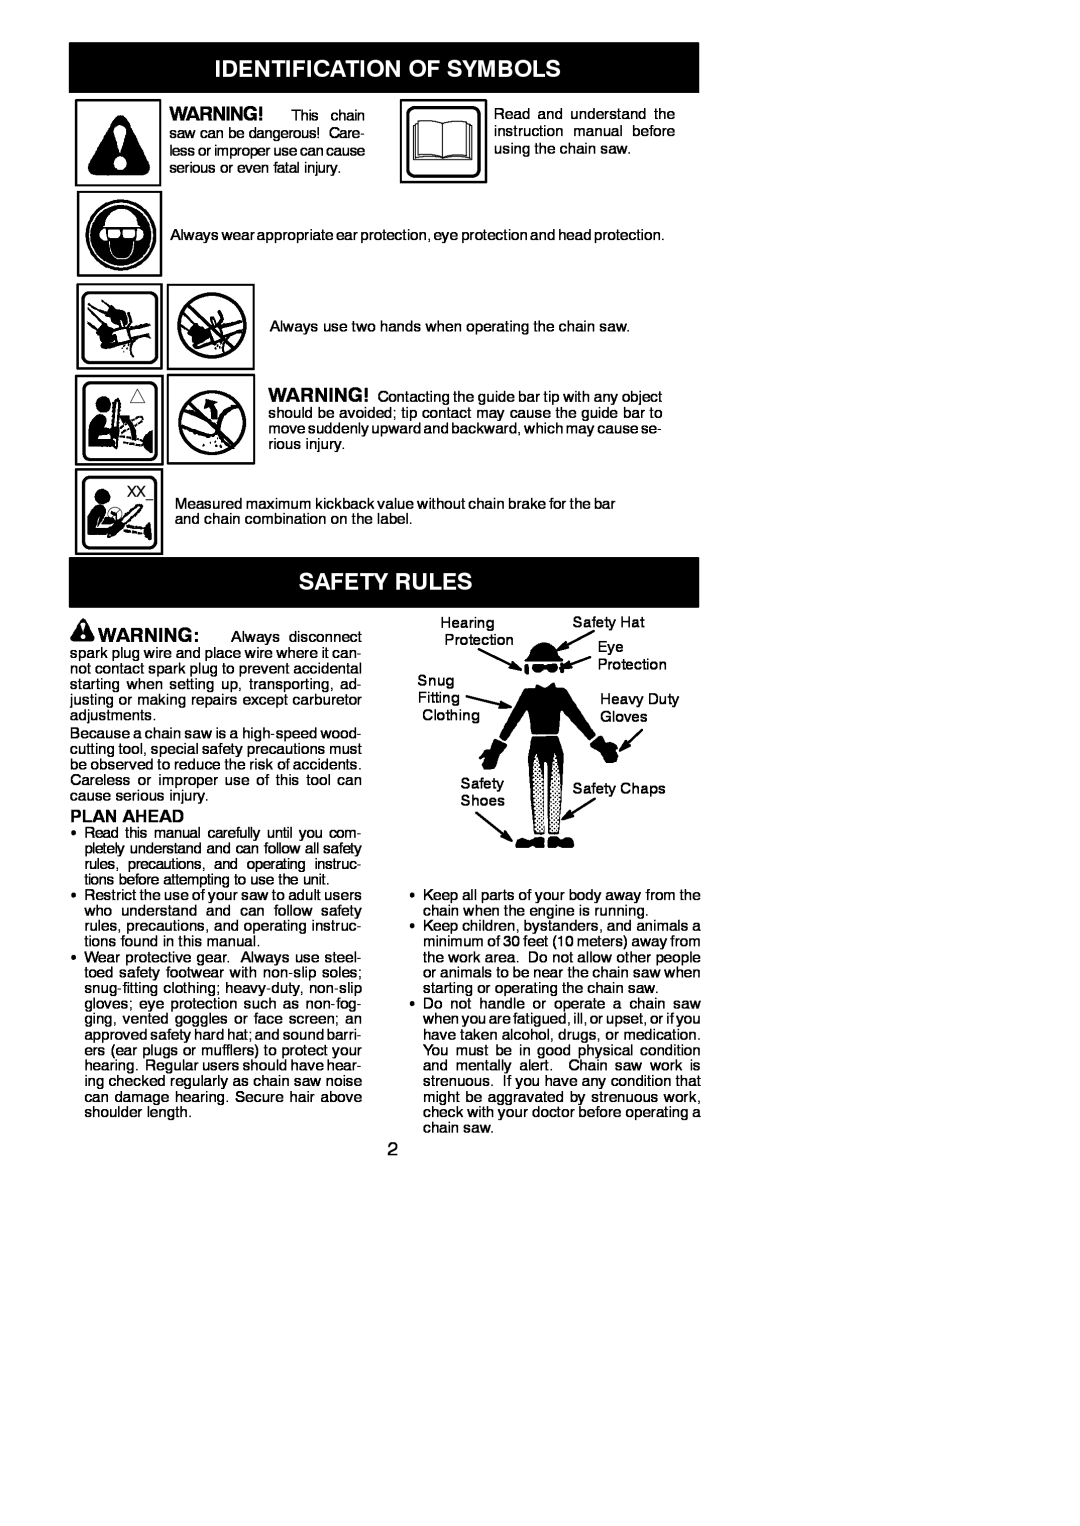 Poulan 530165412, 2004-07 instruction manual Identification Of Symbols, Safety Rules, Plan Ahead 